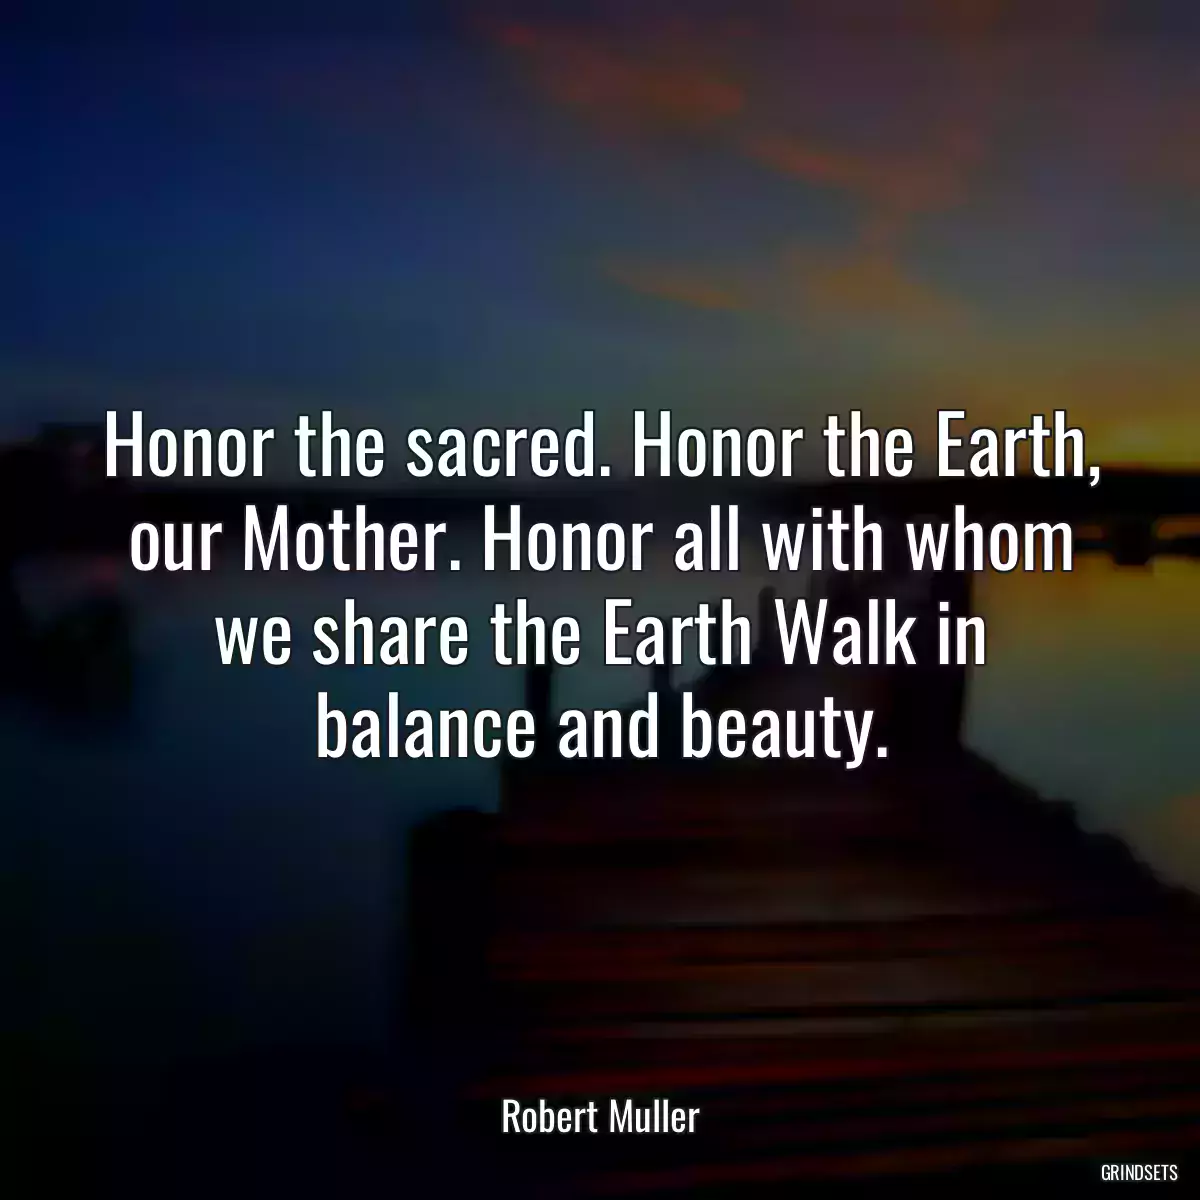 Honor the sacred. Honor the Earth, our Mother. Honor all with whom we share the Earth Walk in balance and beauty.